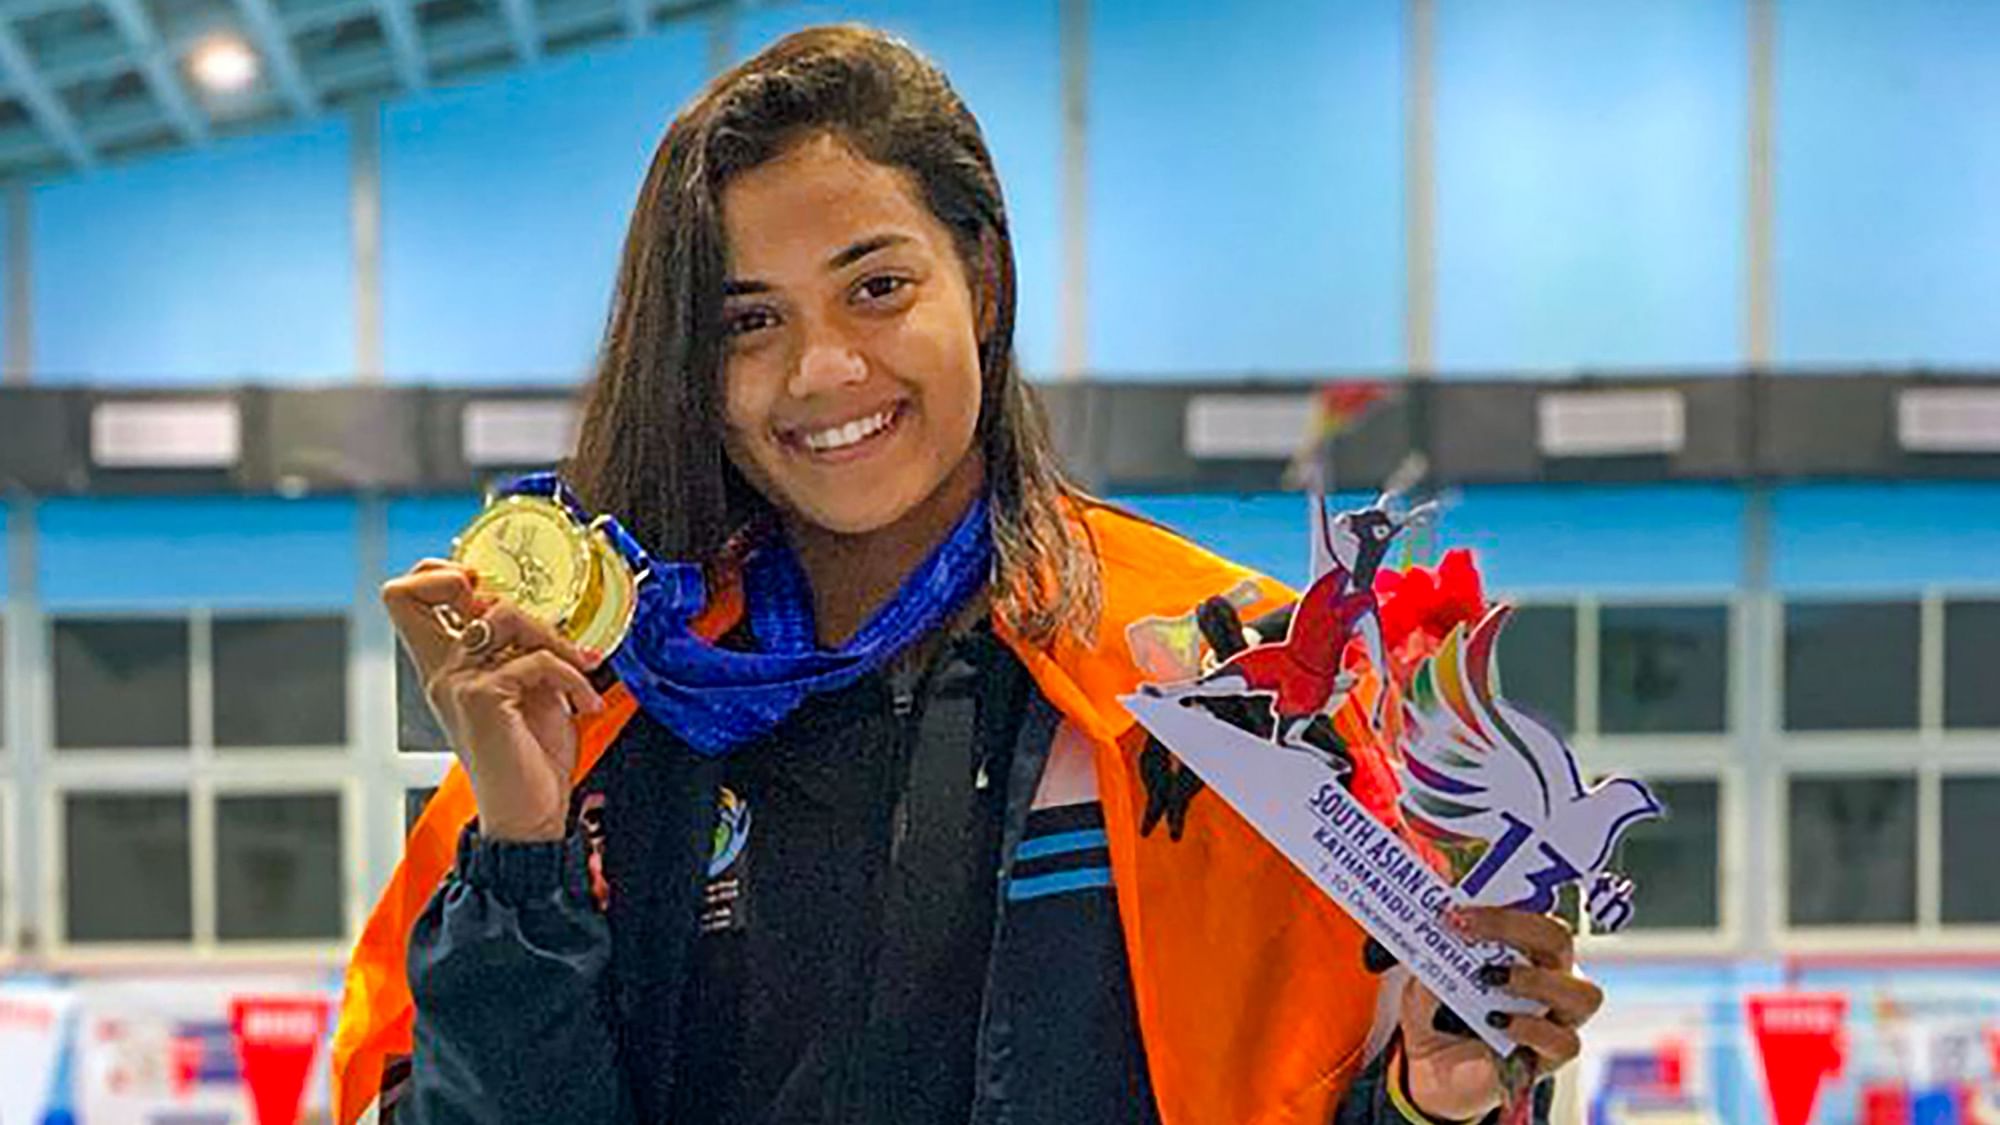 Shivangi Sarma, who clinched a silver medal each in 100 m freestyle, 200 m freestyle and 400 m freestyle at the South Asian Games 2019, expressed that swimming has been given more importance in India in the last few years.